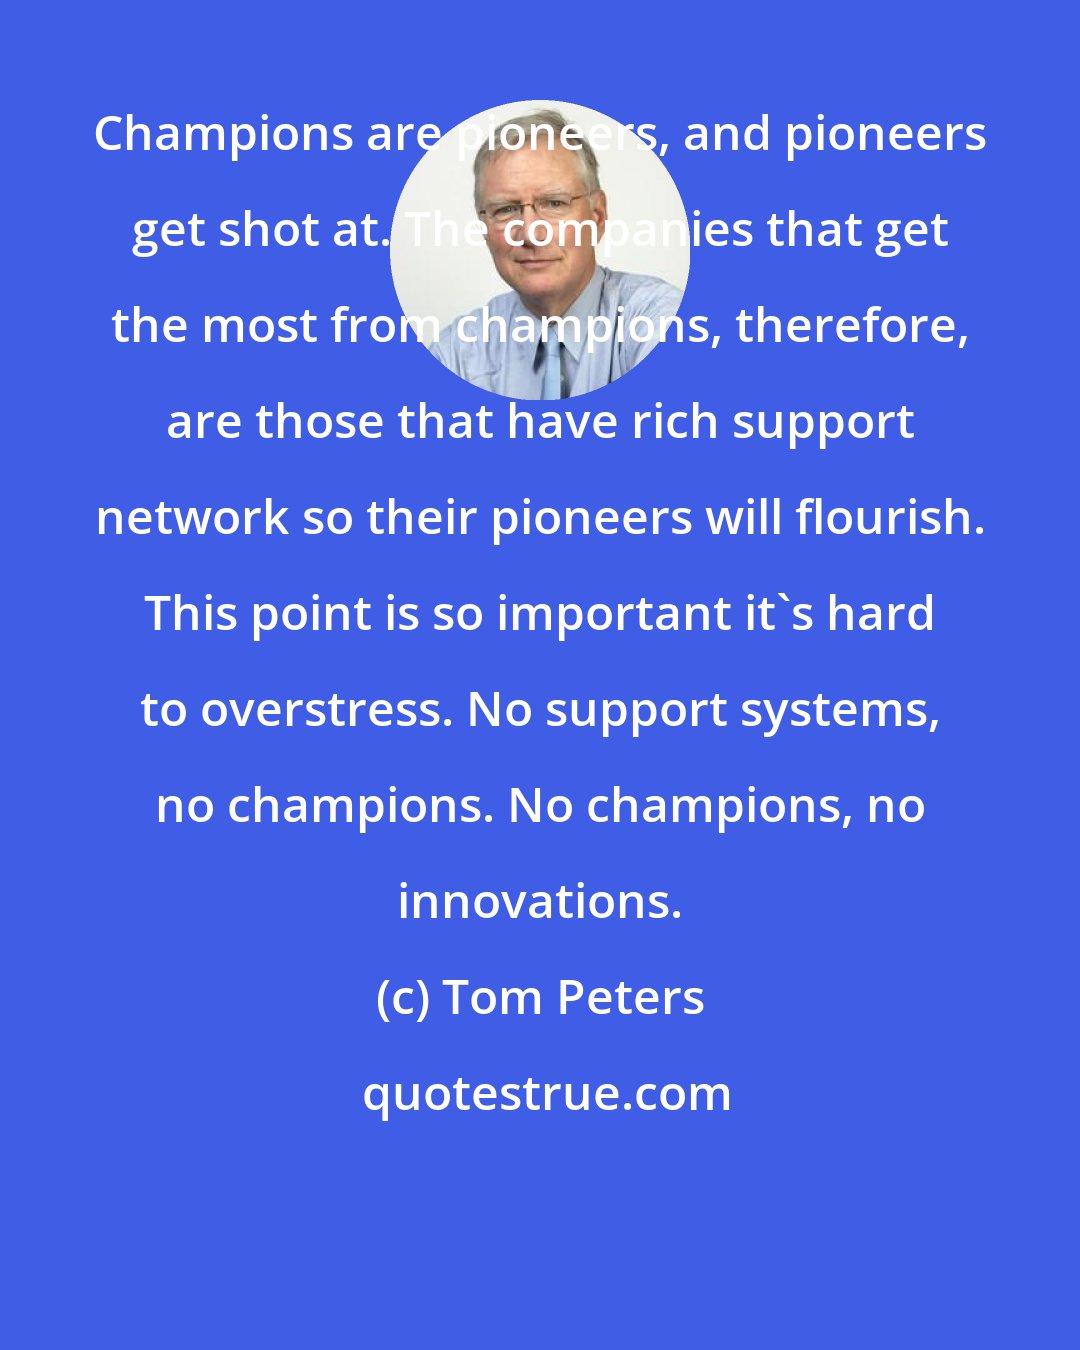 Tom Peters: Champions are pioneers, and pioneers get shot at. The companies that get the most from champions, therefore, are those that have rich support network so their pioneers will flourish. This point is so important it's hard to overstress. No support systems, no champions. No champions, no innovations.